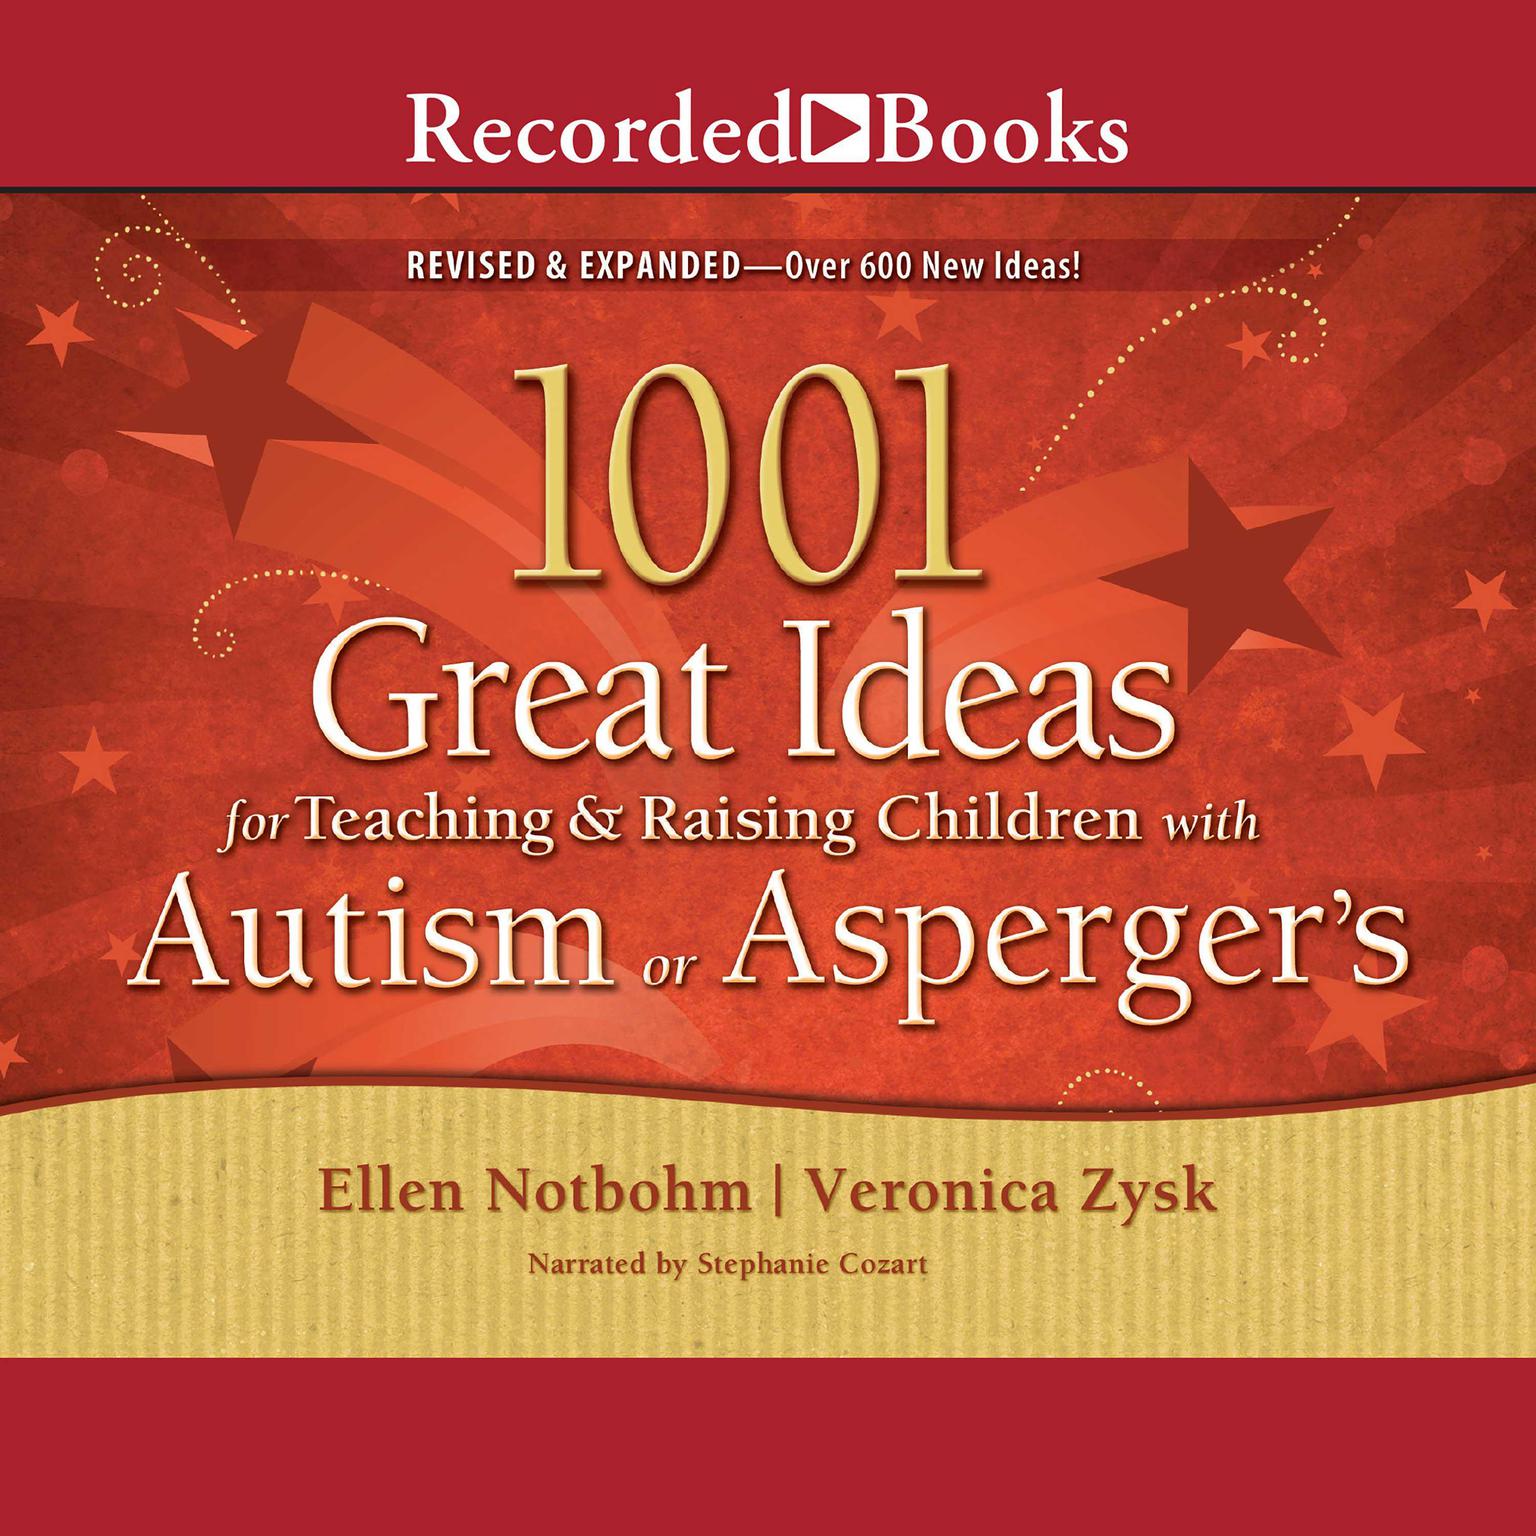 1001 Great Ideas for Teaching and Raising Children with Autism or Aspergers Audiobook, by Ellen Notbohm